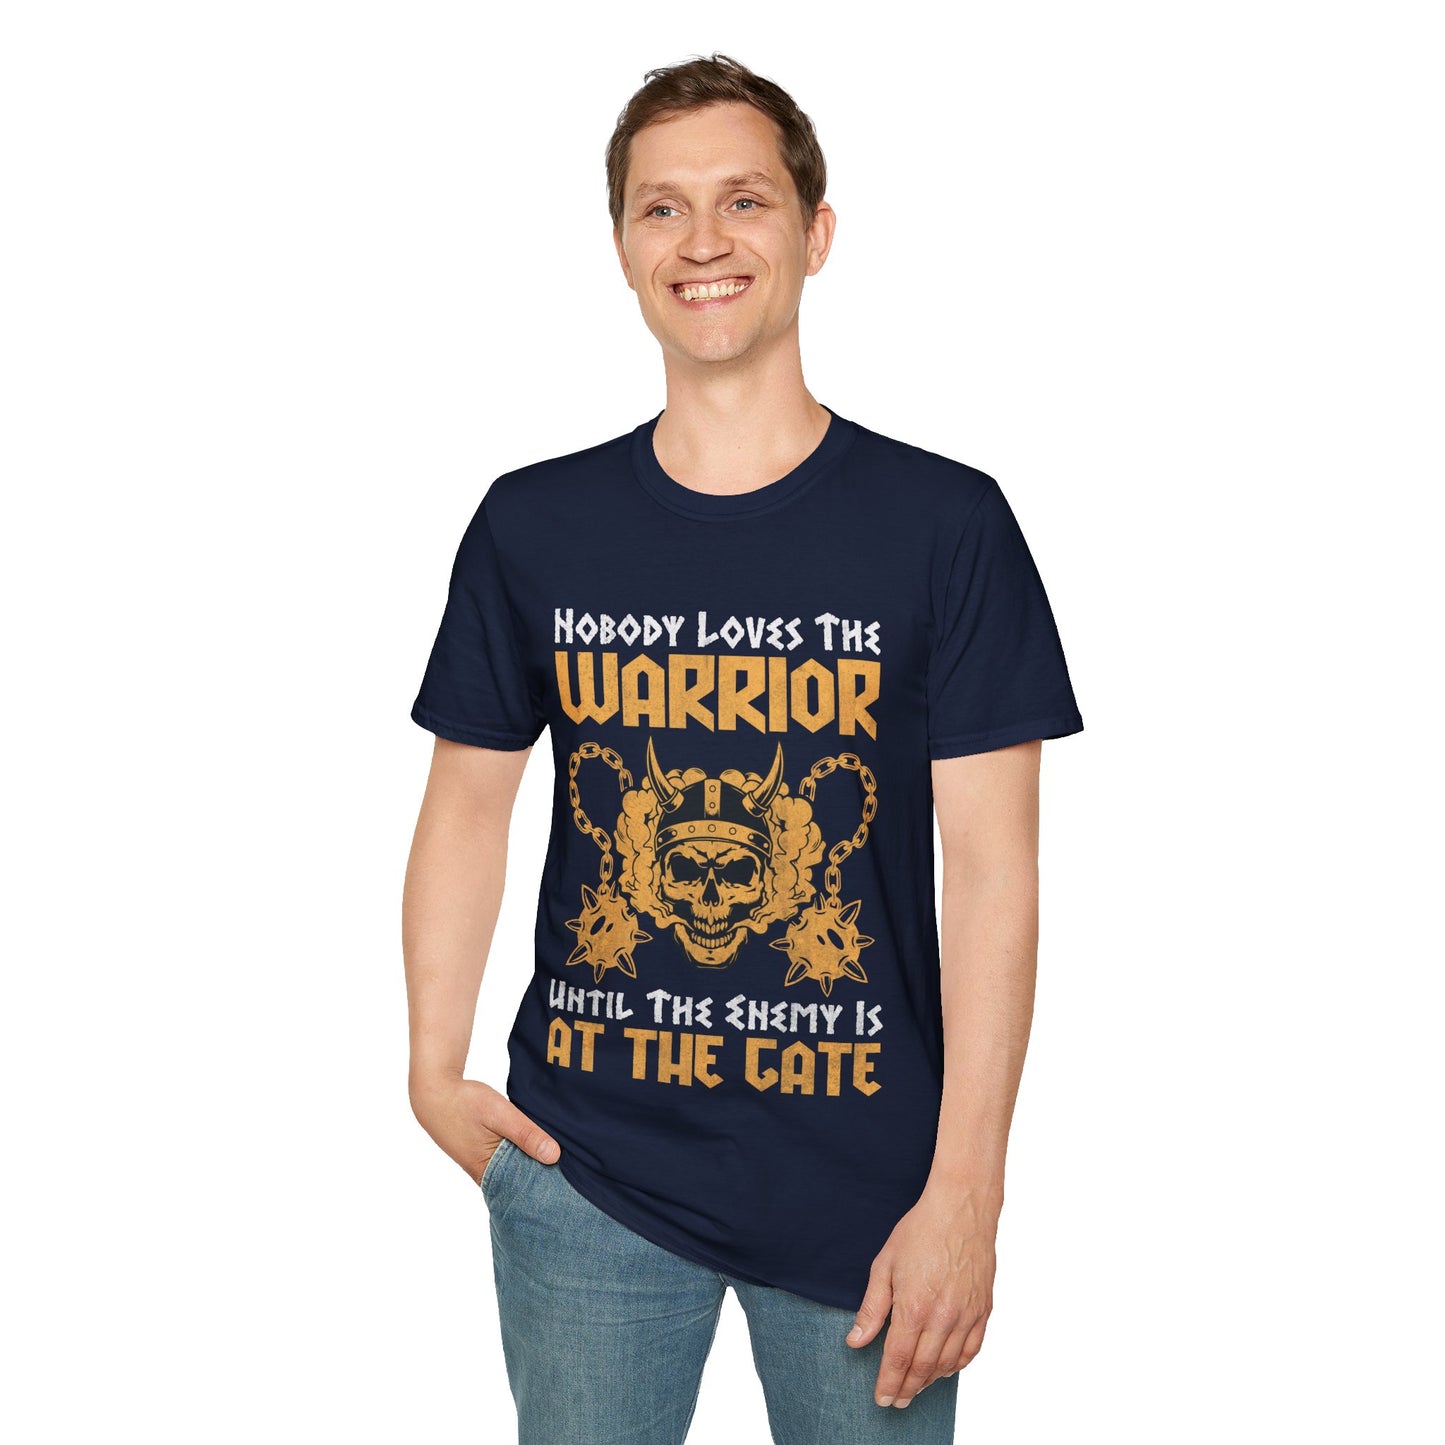 Nobody Loves The Warrior Until The Enemy Is At The Gate T-Shirt